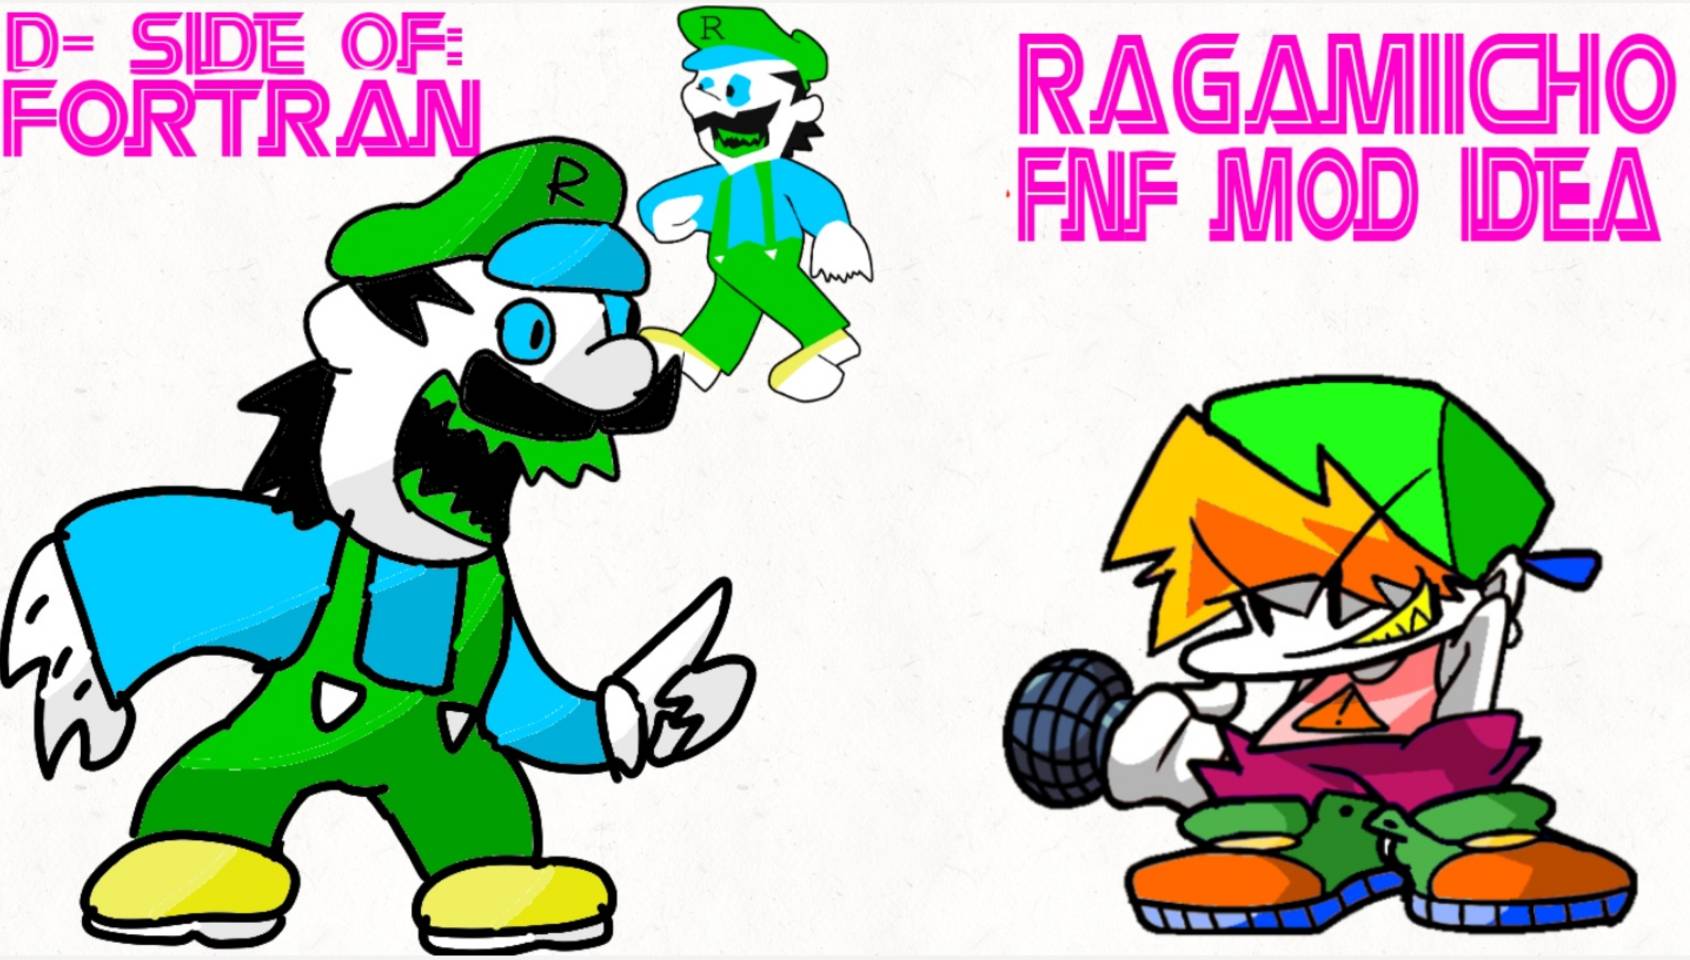 What I only download fnf mods on. by PanickingPie on DeviantArt